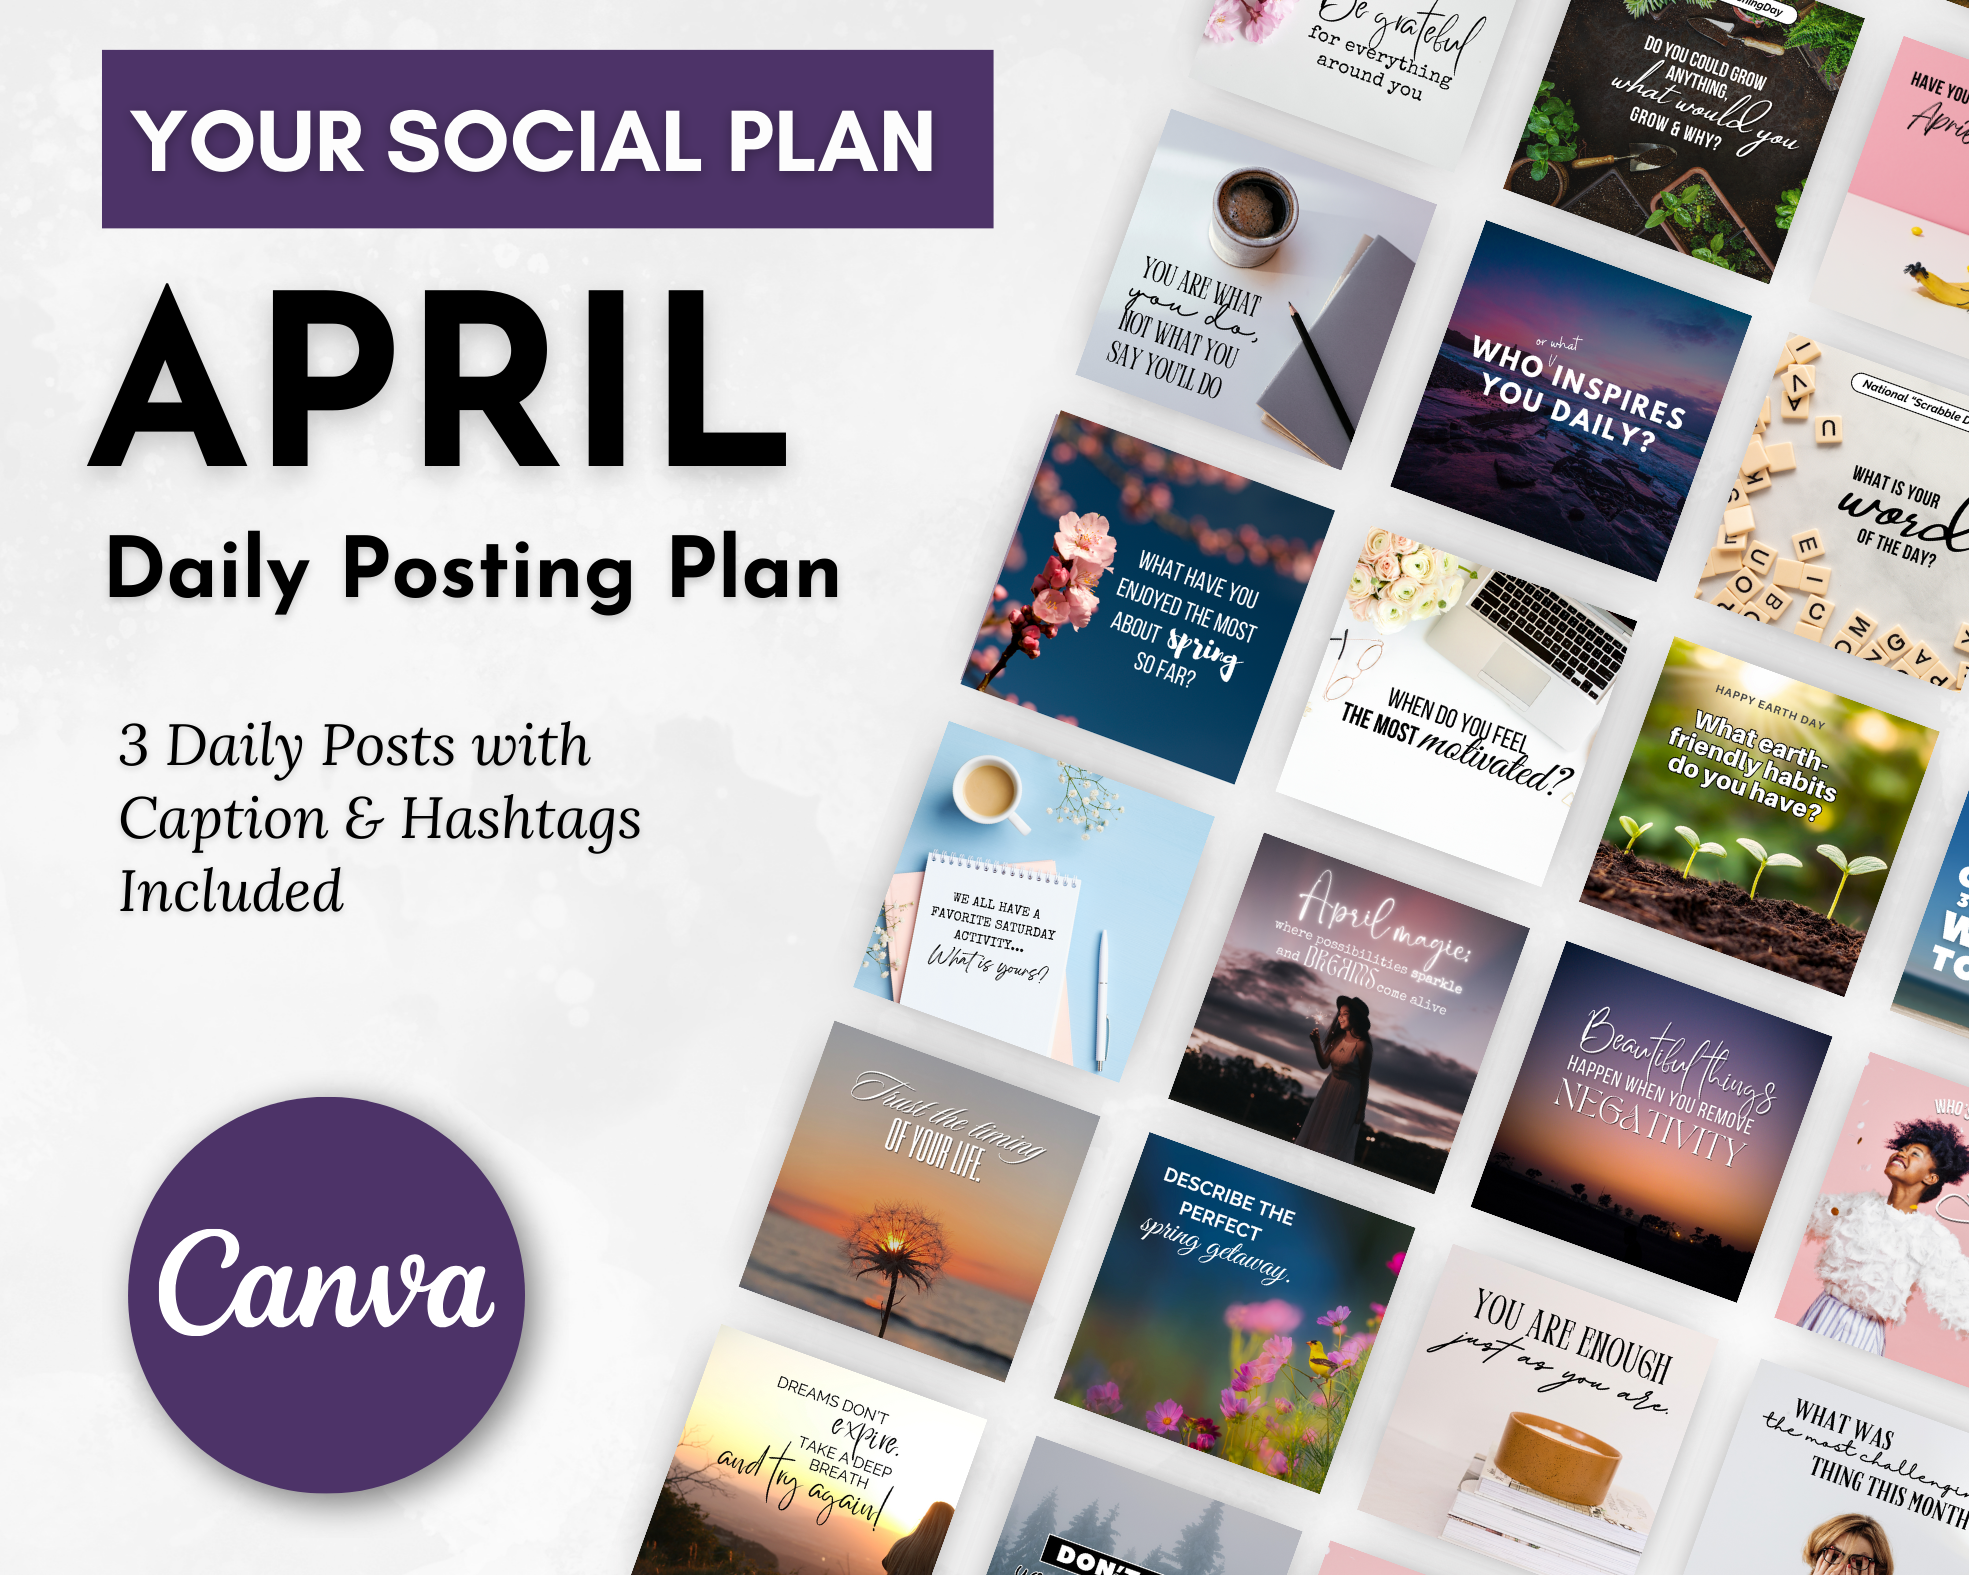 April Daily Posting Plan - Your Social Plan by Get Socially Inclined, with daily post ideas and inspirational quotes, designed for enhanced social media presence, all crafted in Canva.